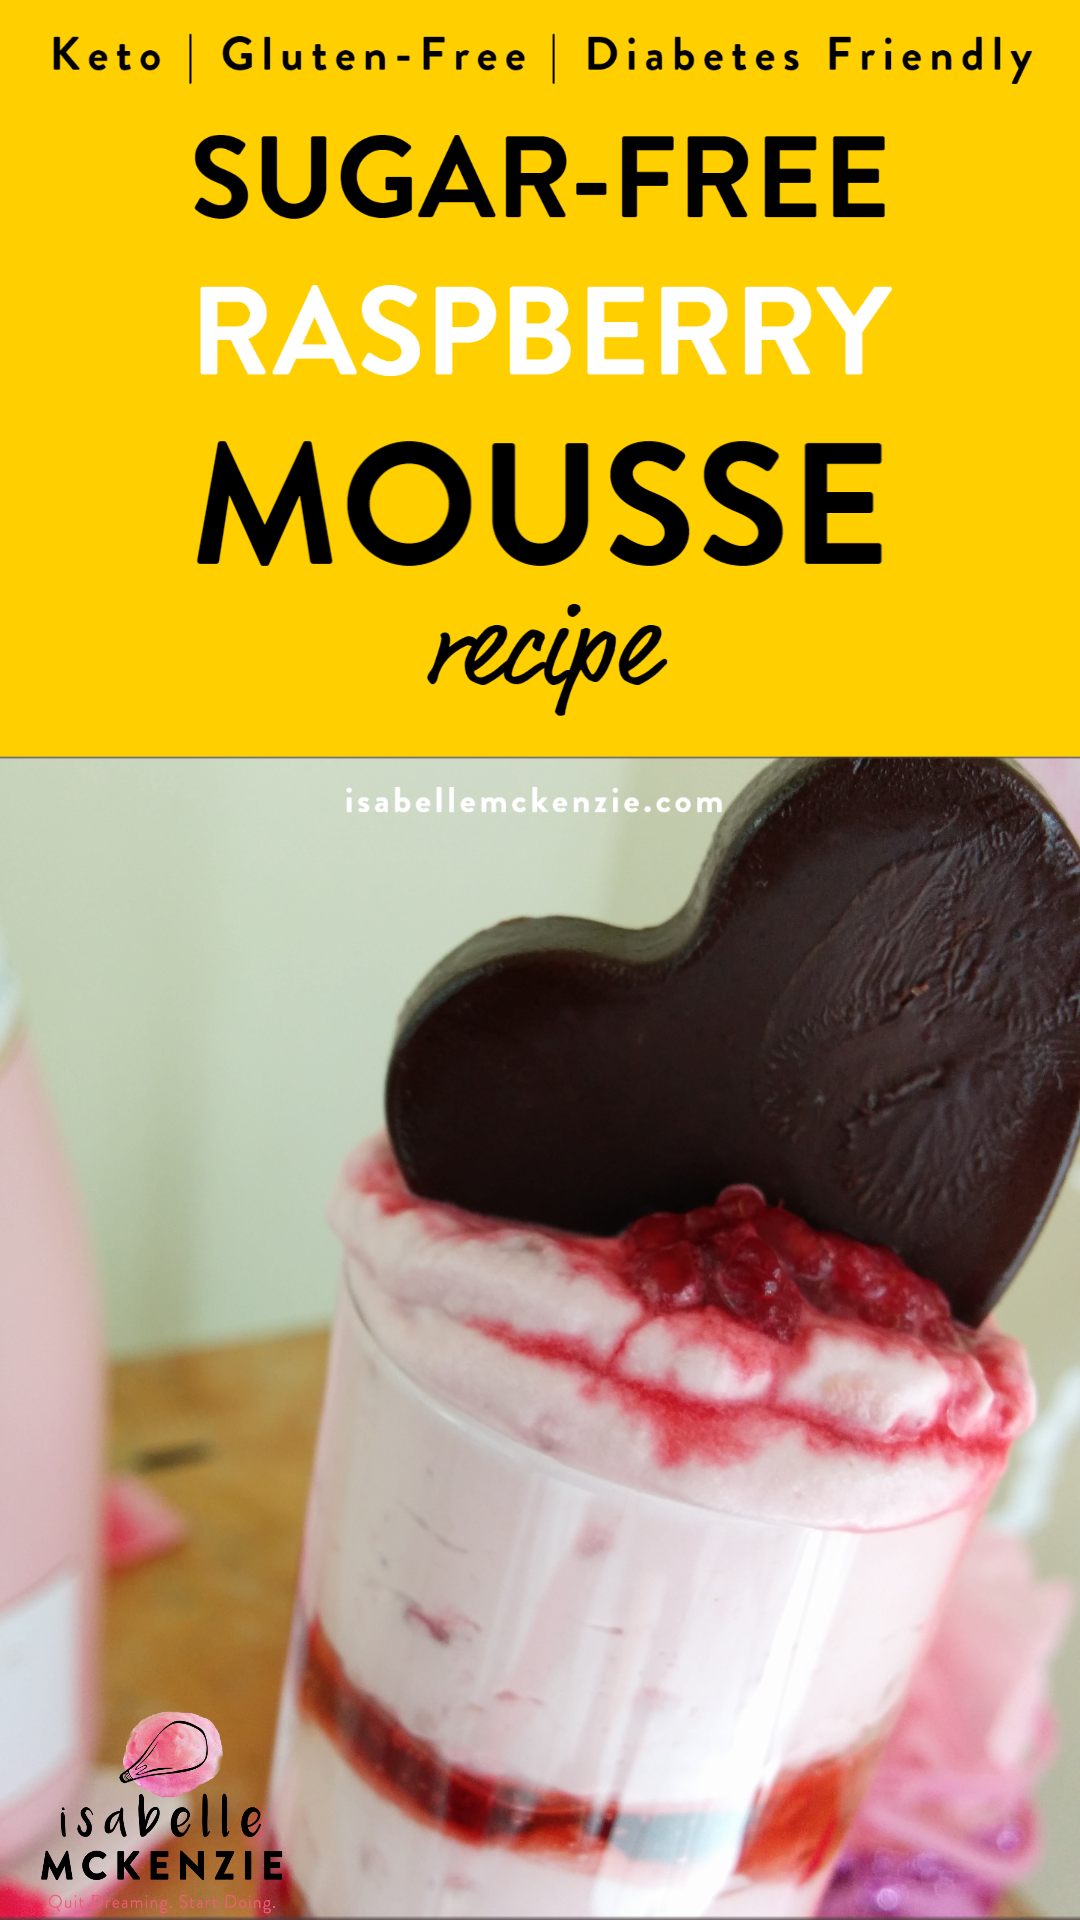  Sweet, romantic, and healthy. This no-bake raspberry cheesecake mousse is sugar free, keto, easy to make, delicious, and sweet - perfect for a lovely guilt free Valentines Day evening with your SO, galentines meetup, a cozy Netflix binge snack, or a